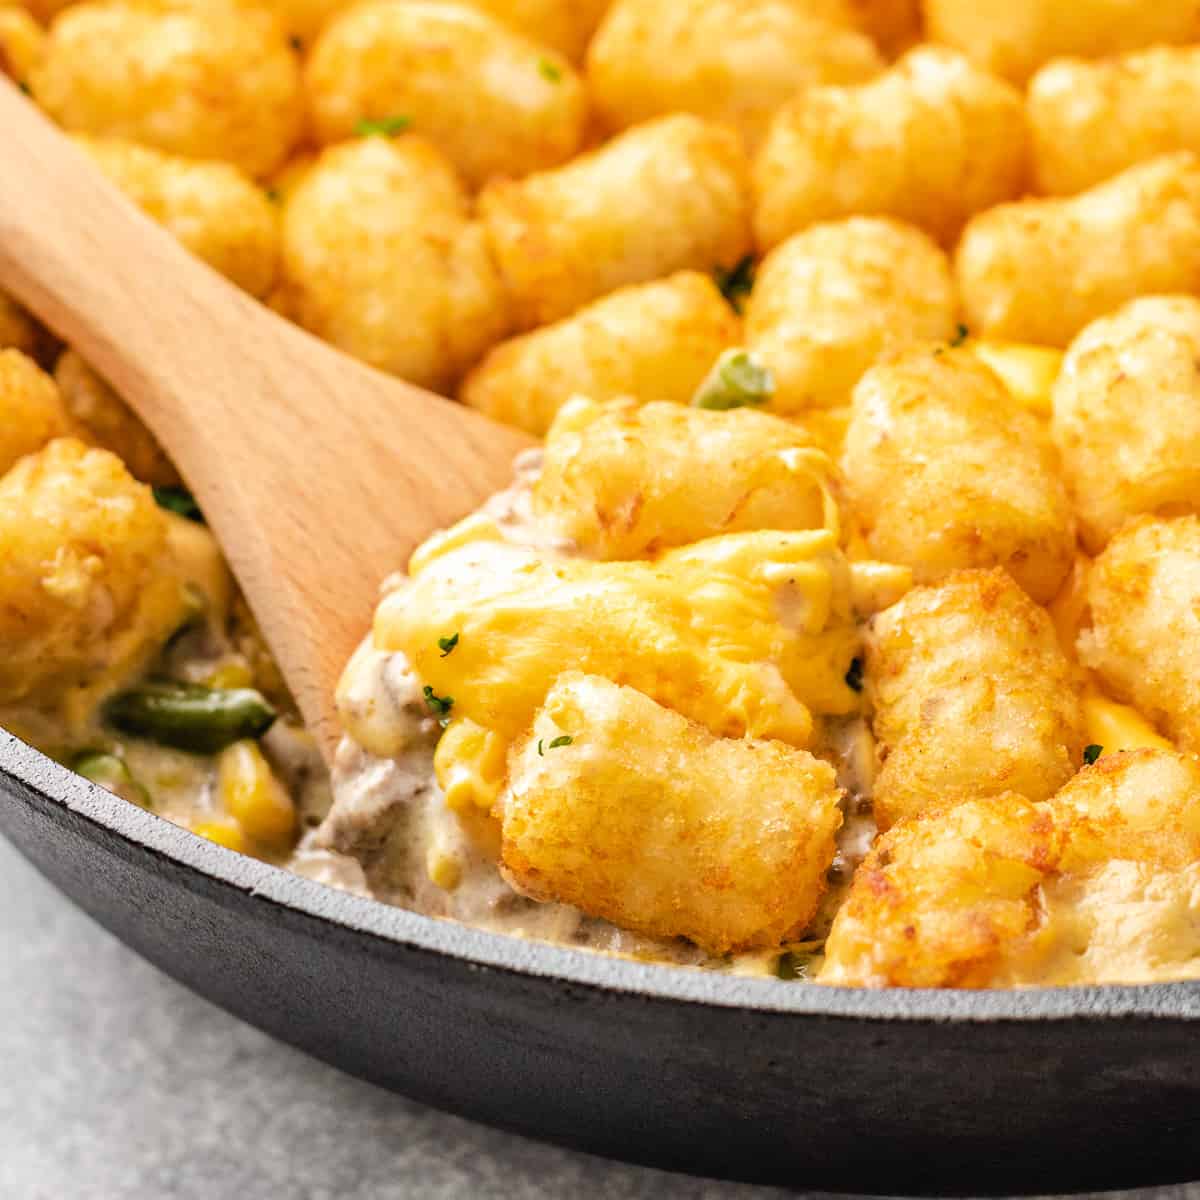 Tater tot casserole (with ground beef)